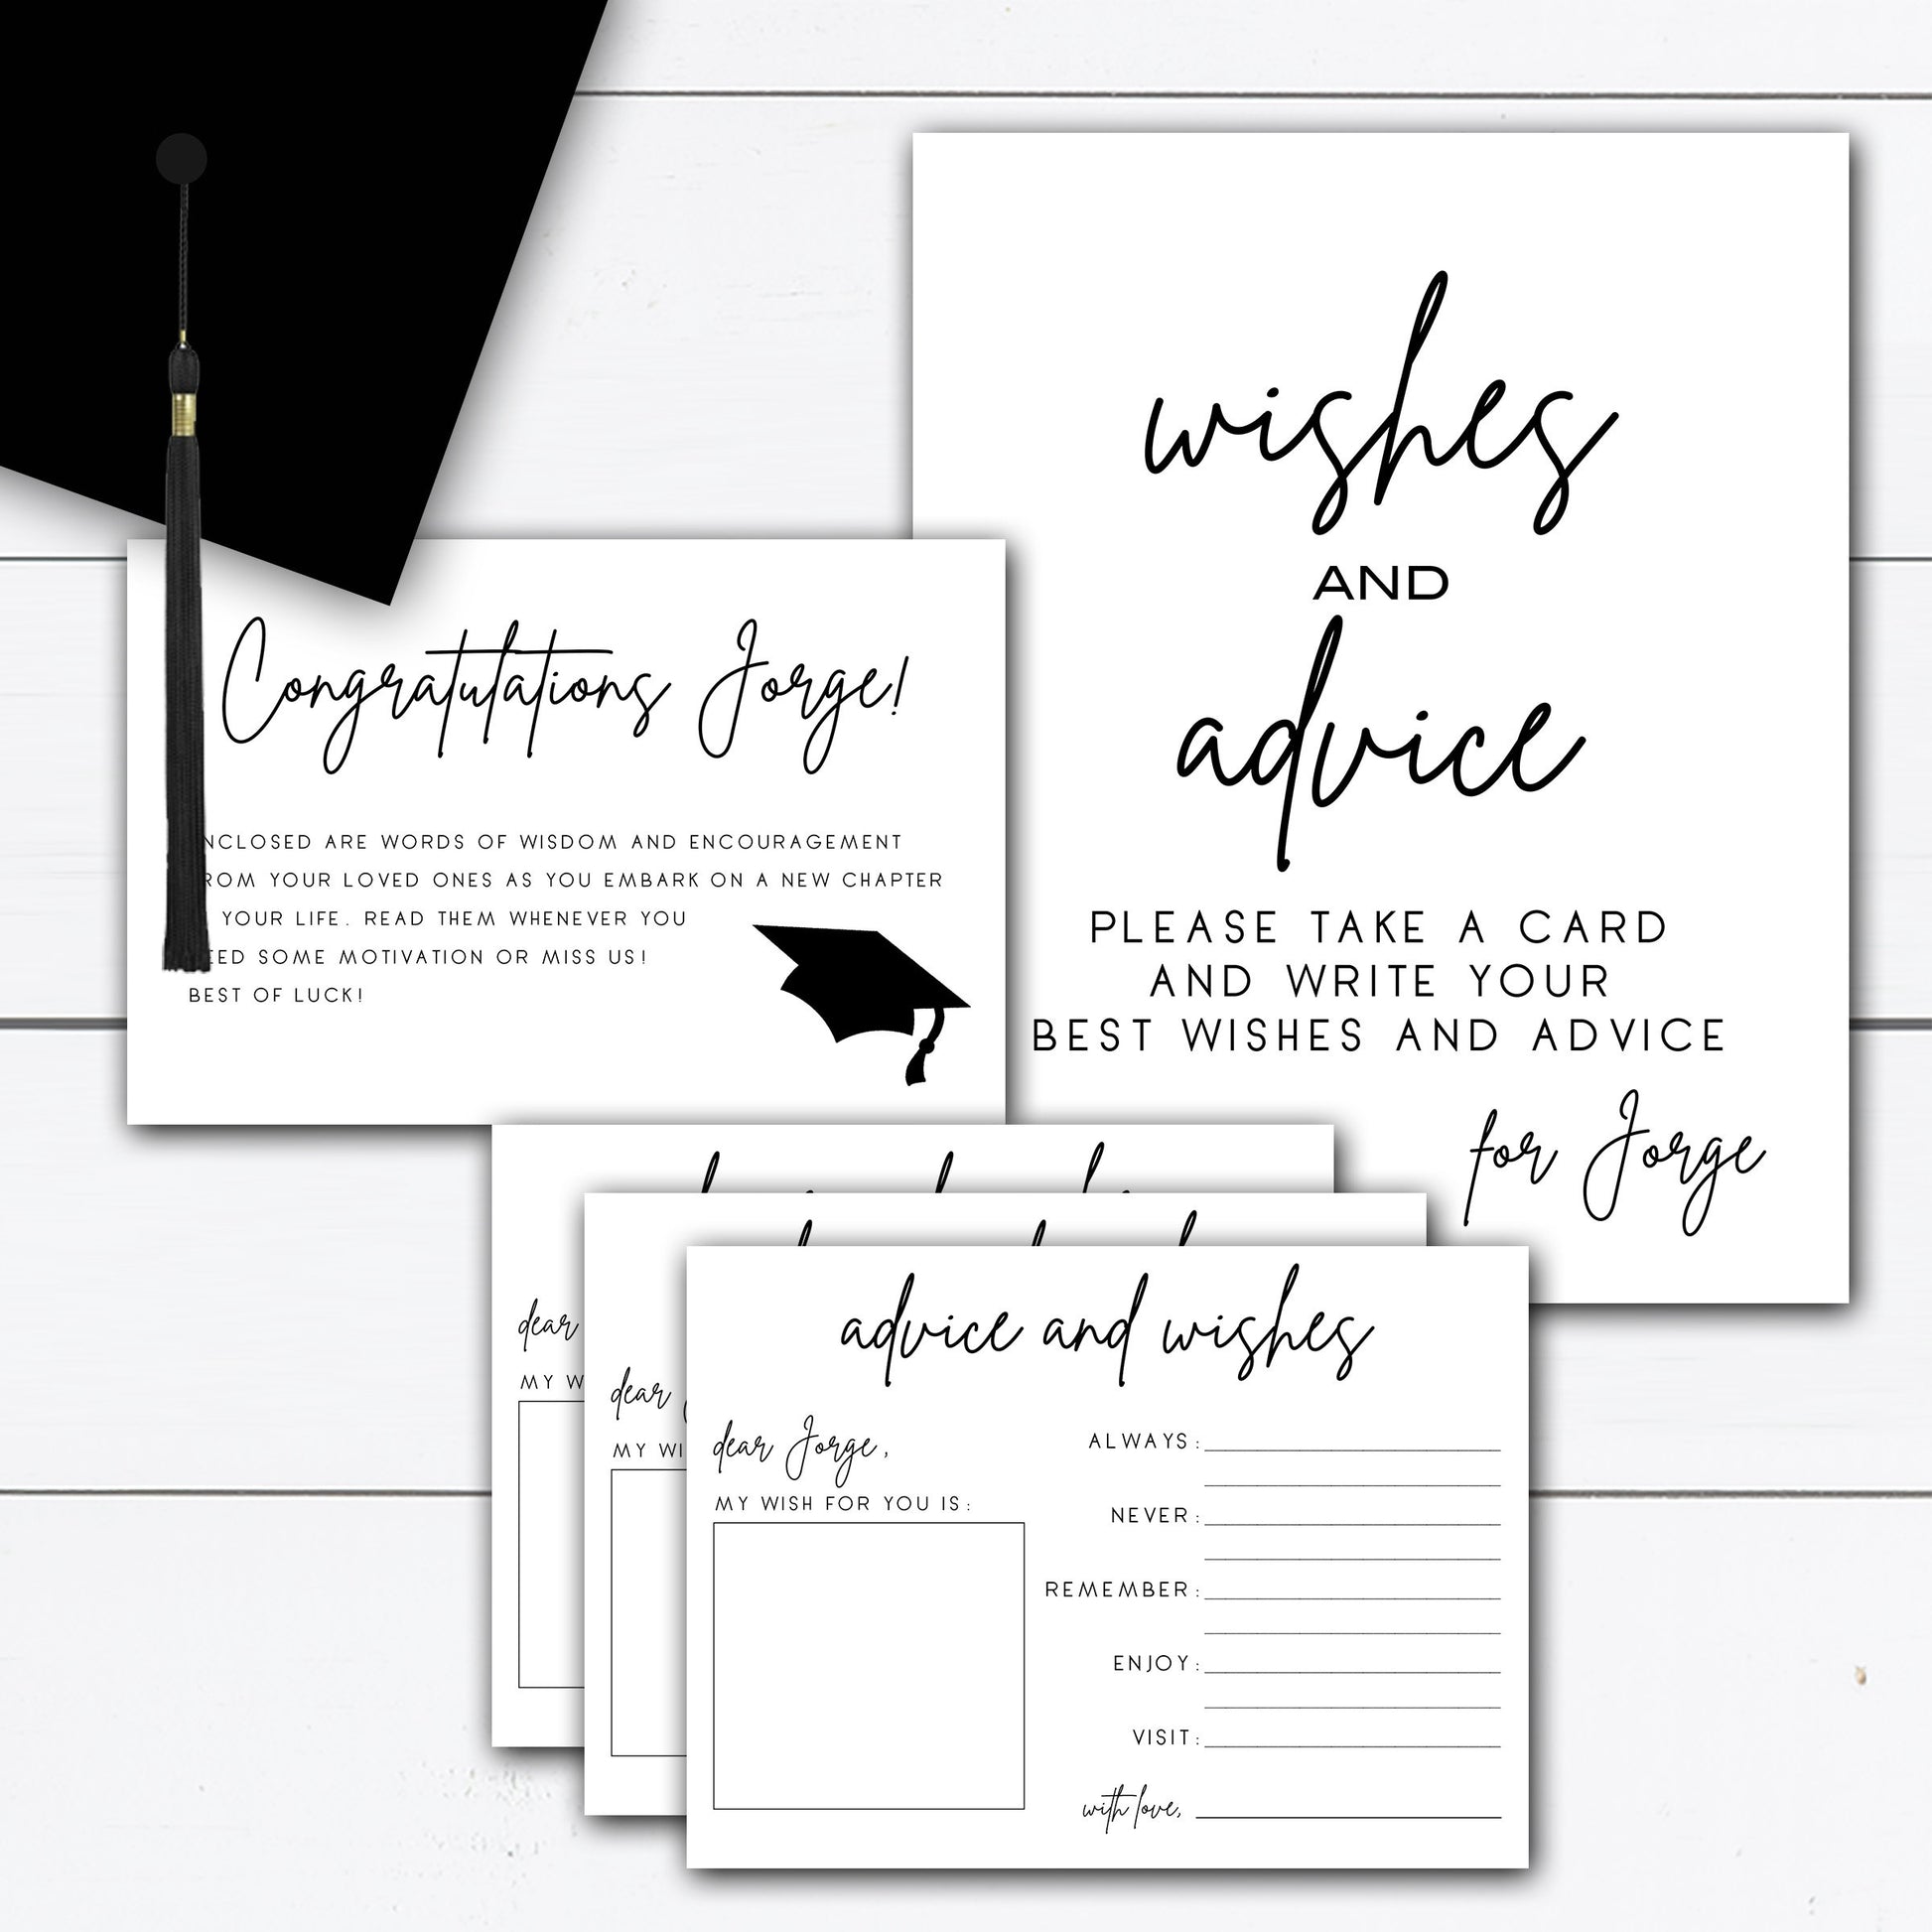 Wishes Card, Advice and Wishes, Wishes for the Graduate, Advice Cards,  Advice Cards for Graduate, Graduation Wisdom Cards, Graduation Gift